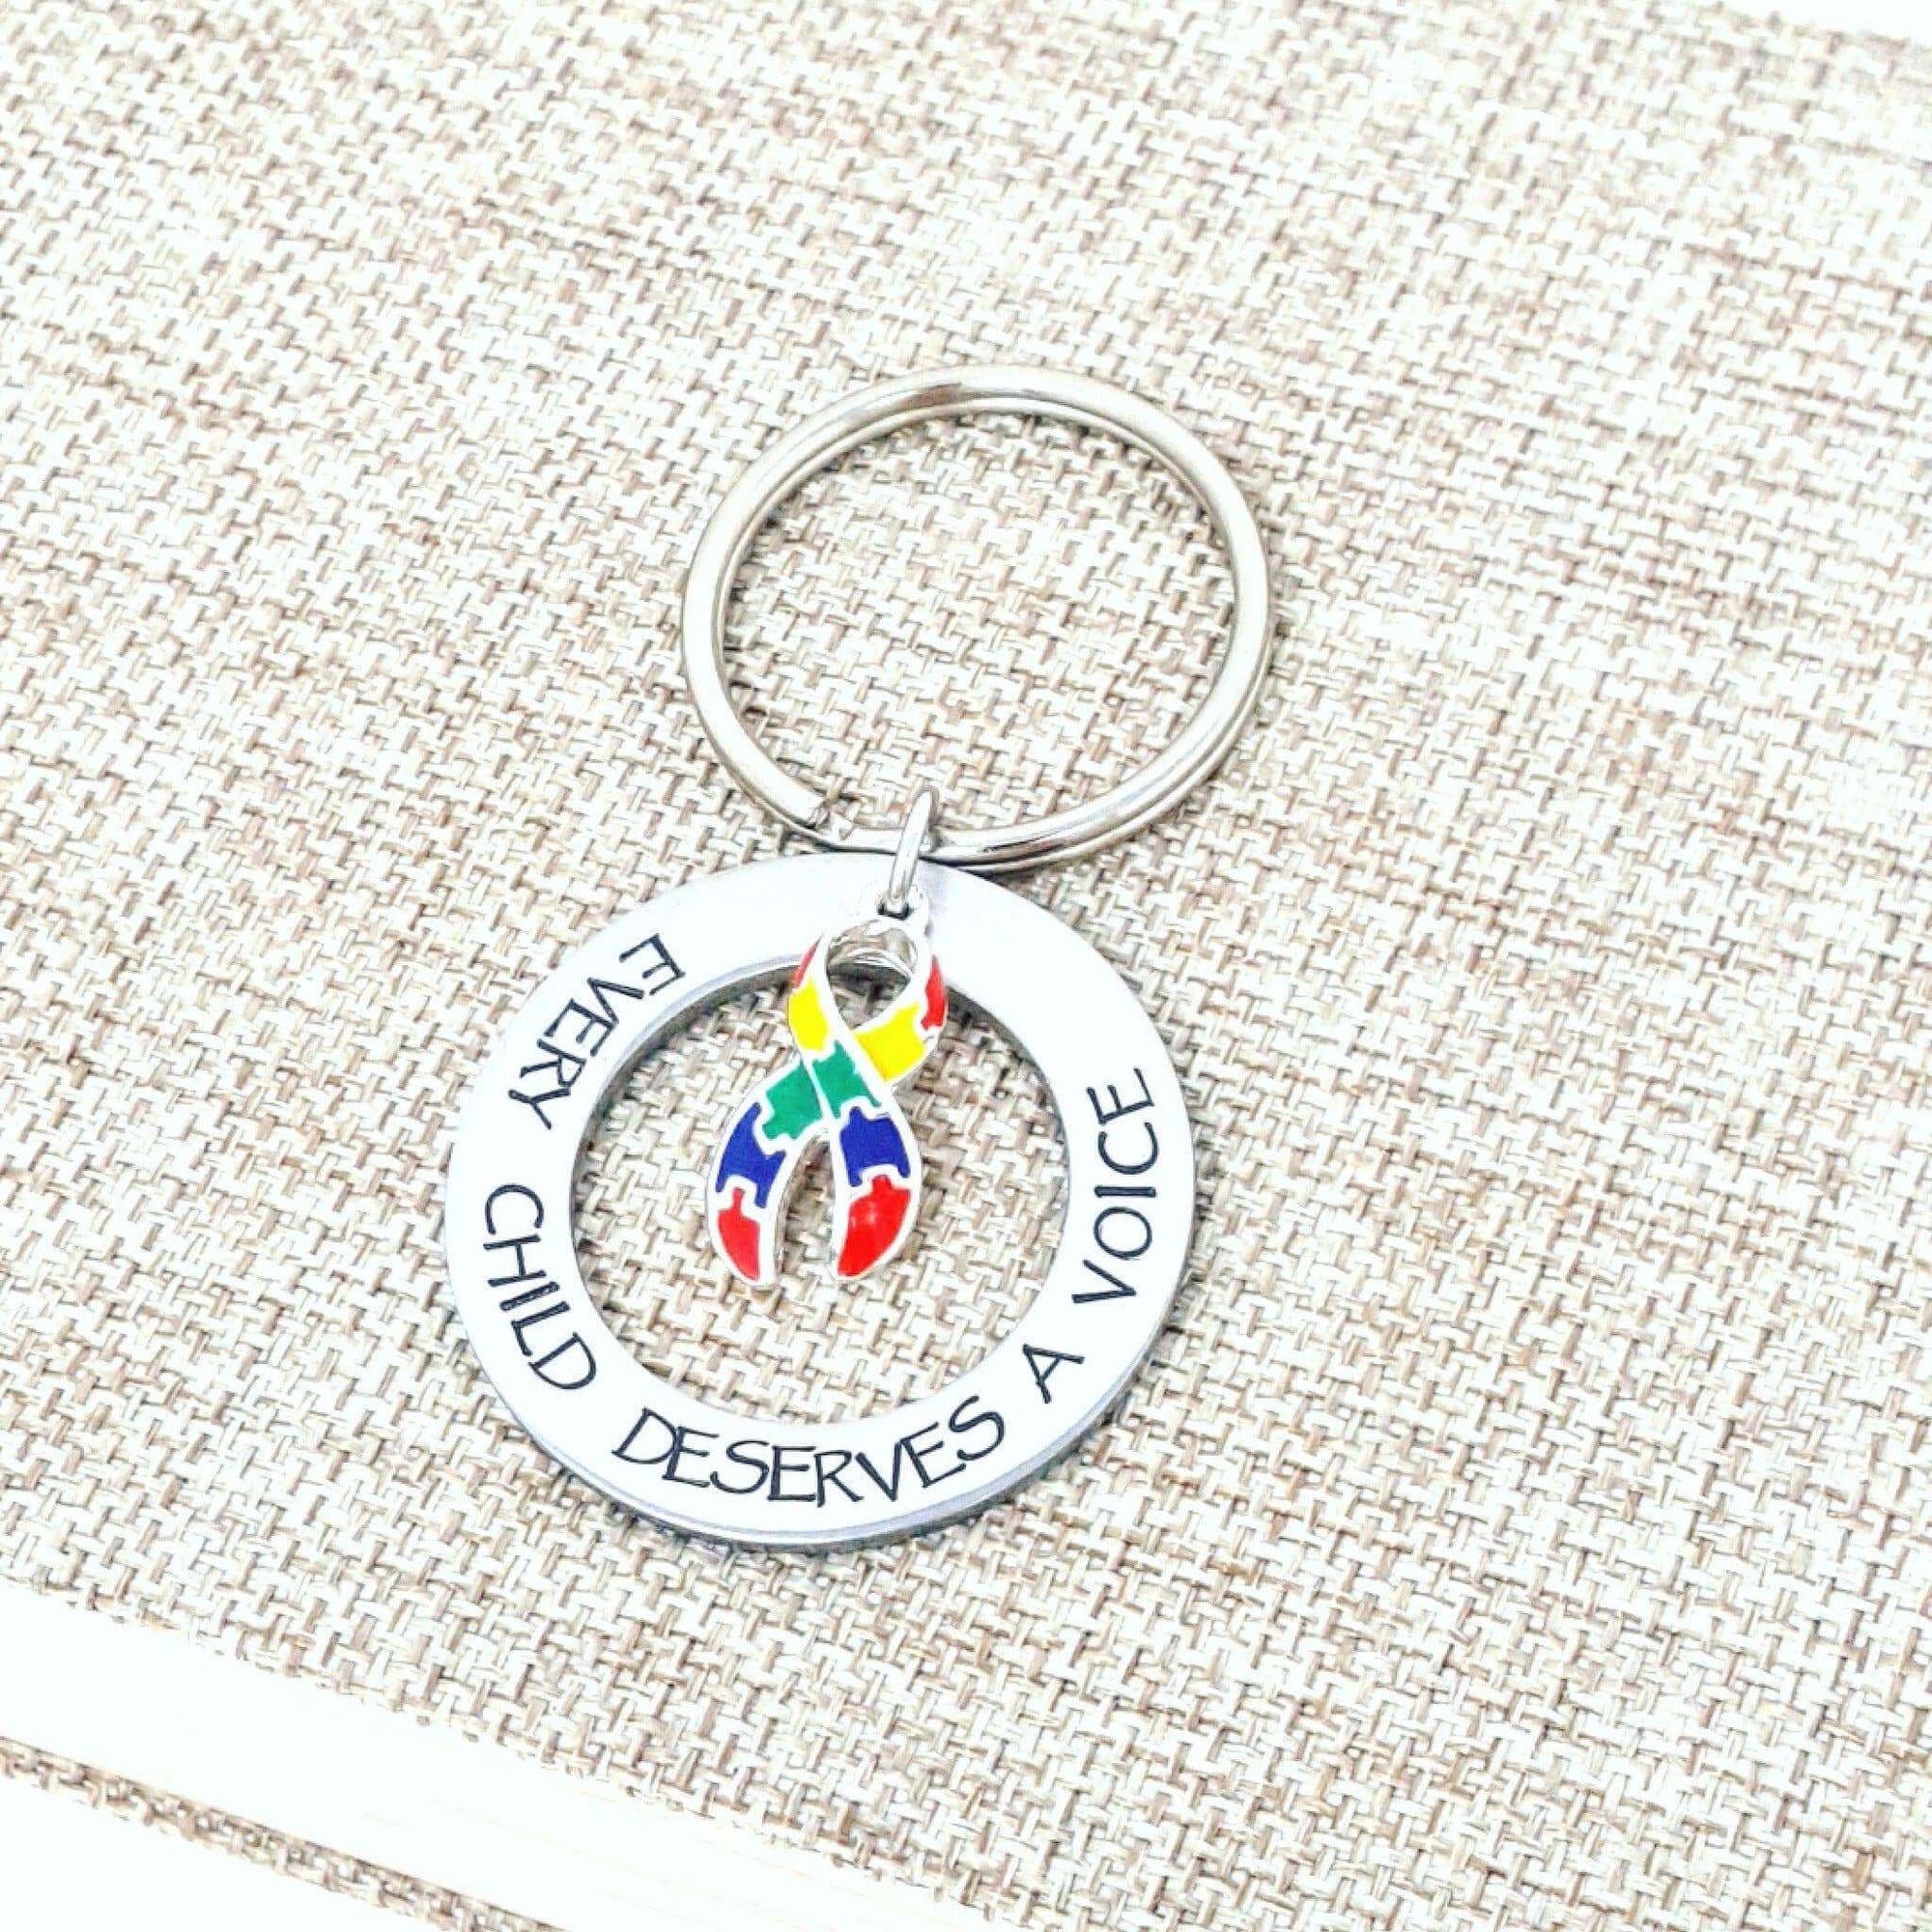 Autism Awareness Keychain, Every Child Deserves A Voice, Aspergers, Autism Spectrum, Special Needs, Keychains, HandmadeLoveStories, HandmadeLoveStories , [Handmade_Love_Stories], [Hand_Stamped_Jewelry], [Etsy_Stamped_Jewelry], [Etsy_Jewelry]